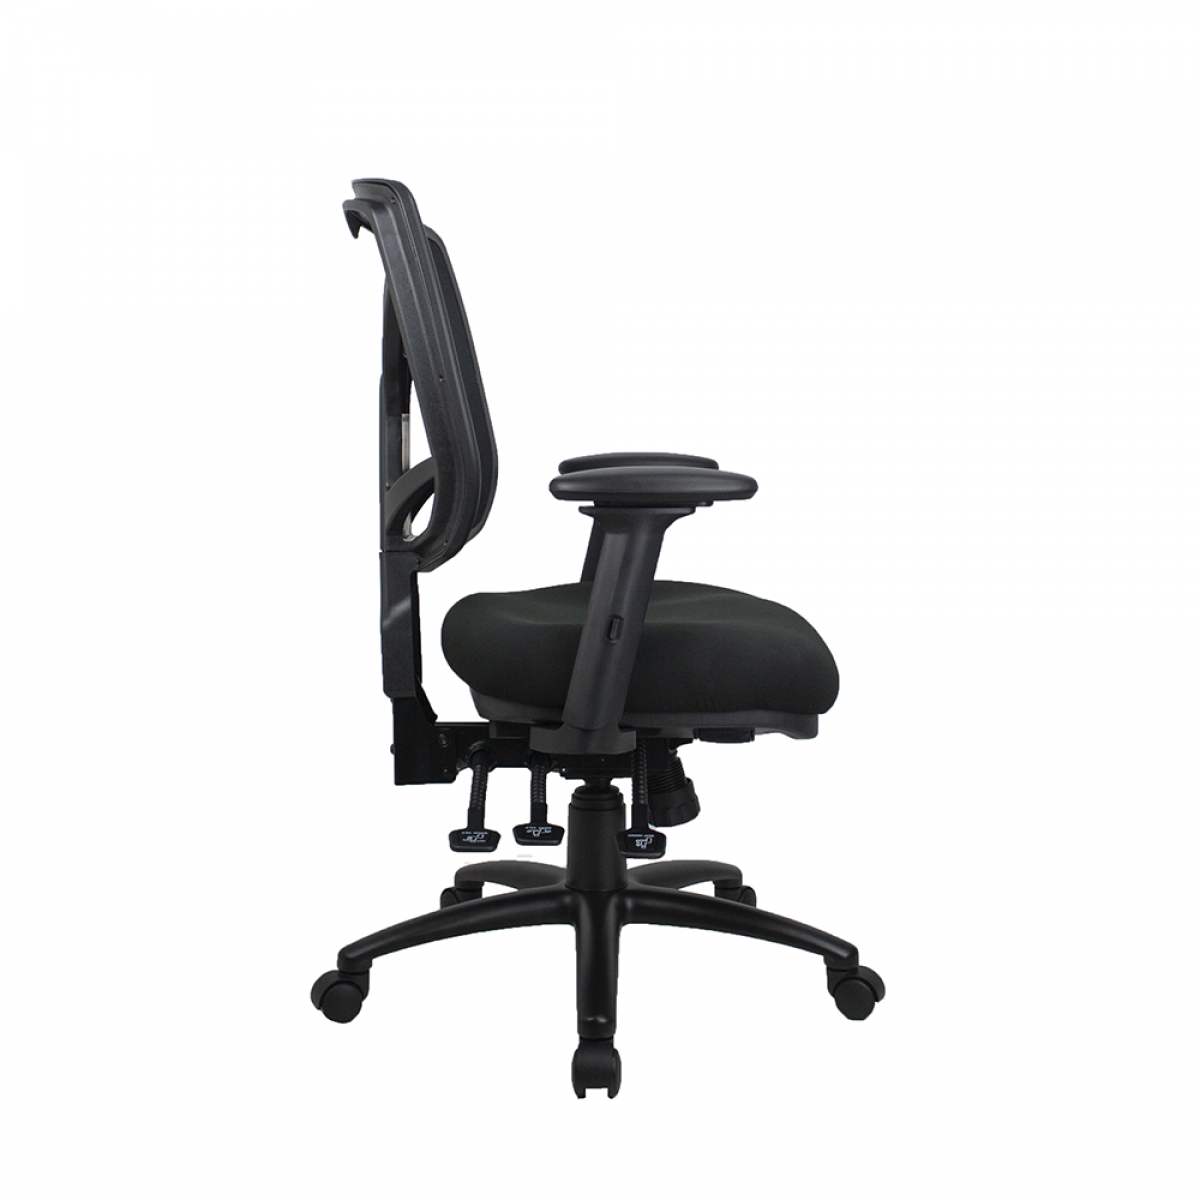 Monti Therapeutic Office chair Posture Correct Mesh Back Fully